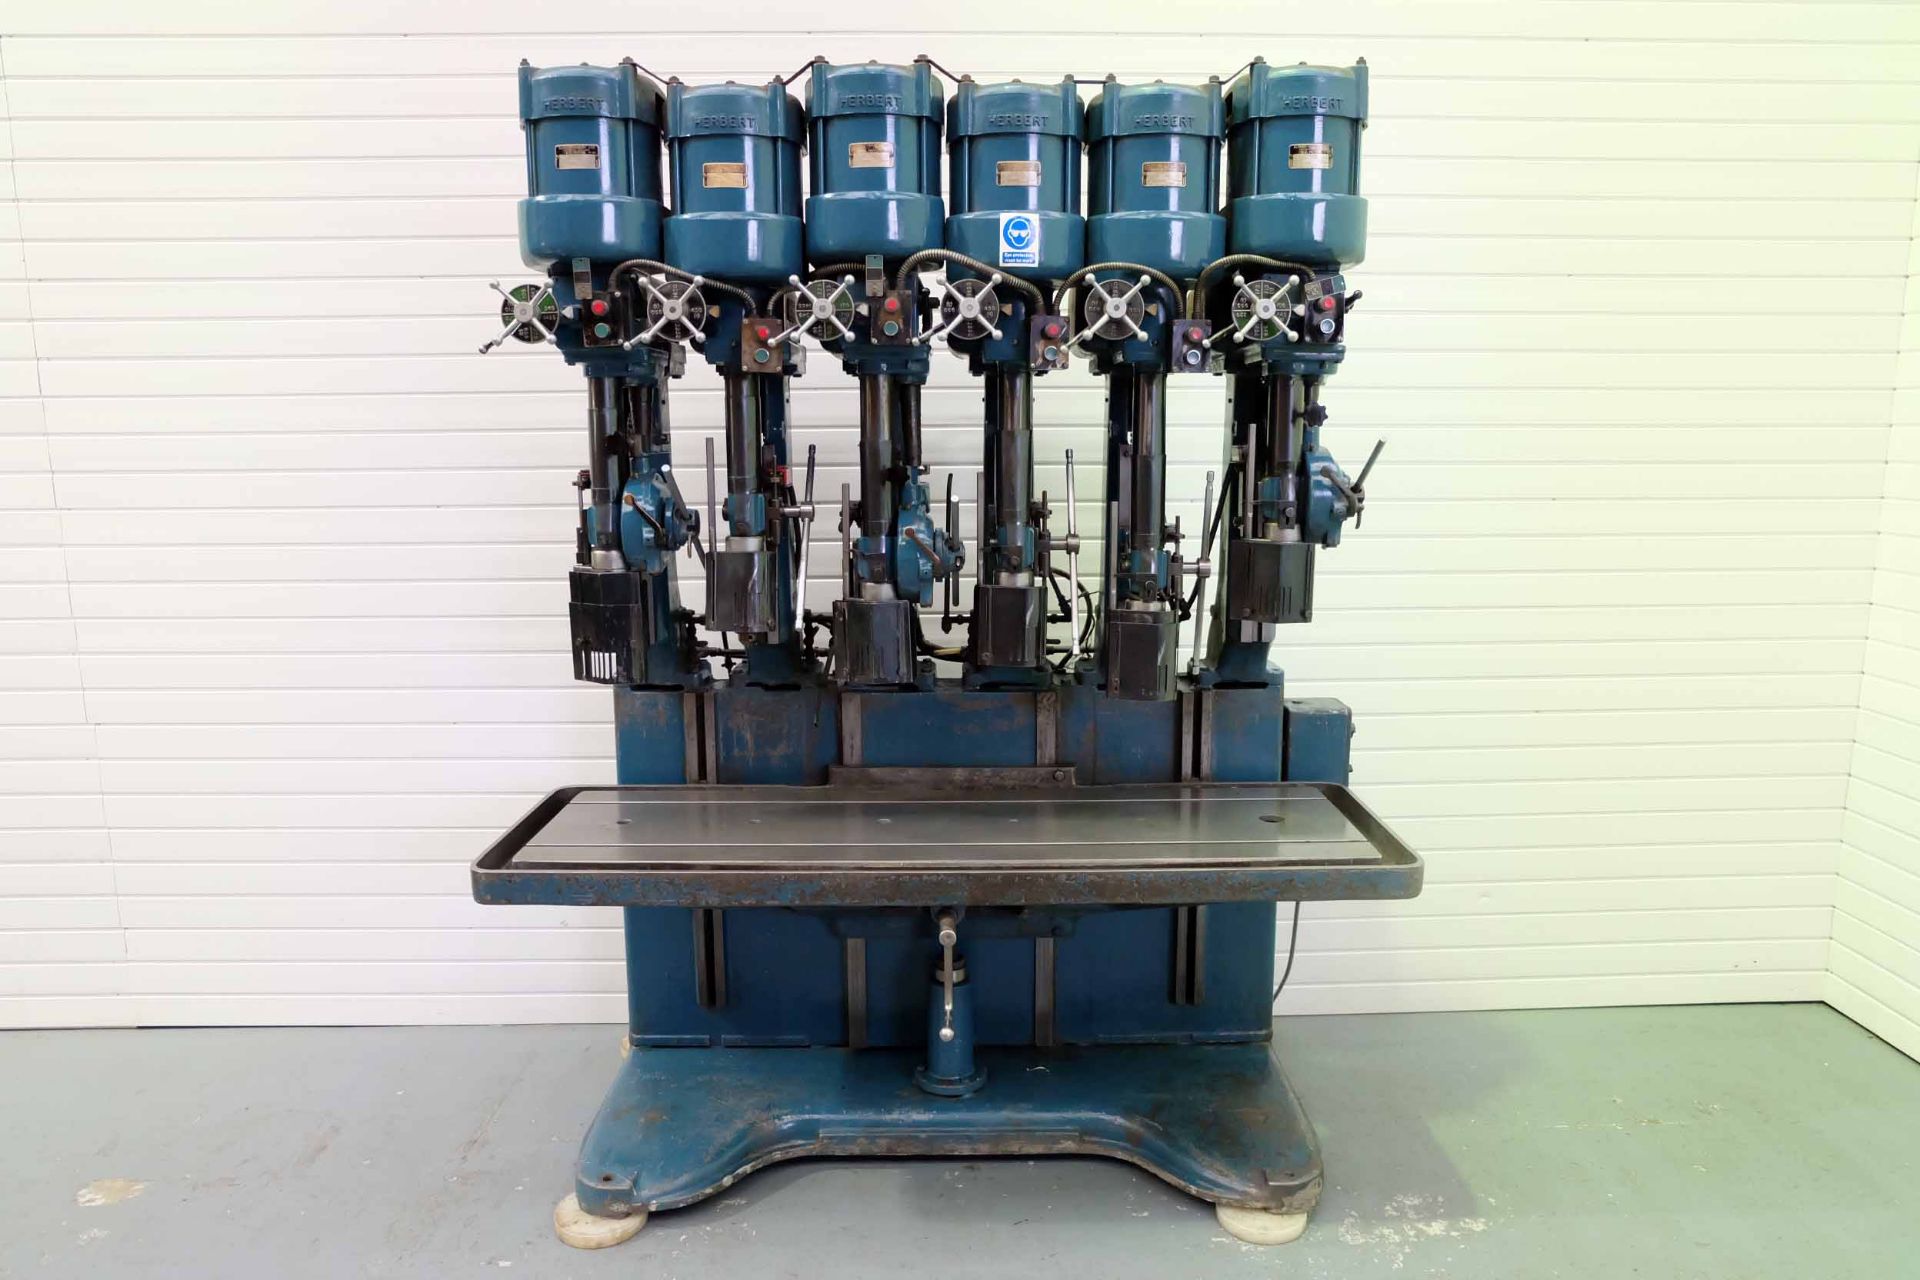 Herbert 6 Spindle In-Line Drilling Machine. 3 x Spindles 3MT With Power feed. 3 x Spindles 2MT With